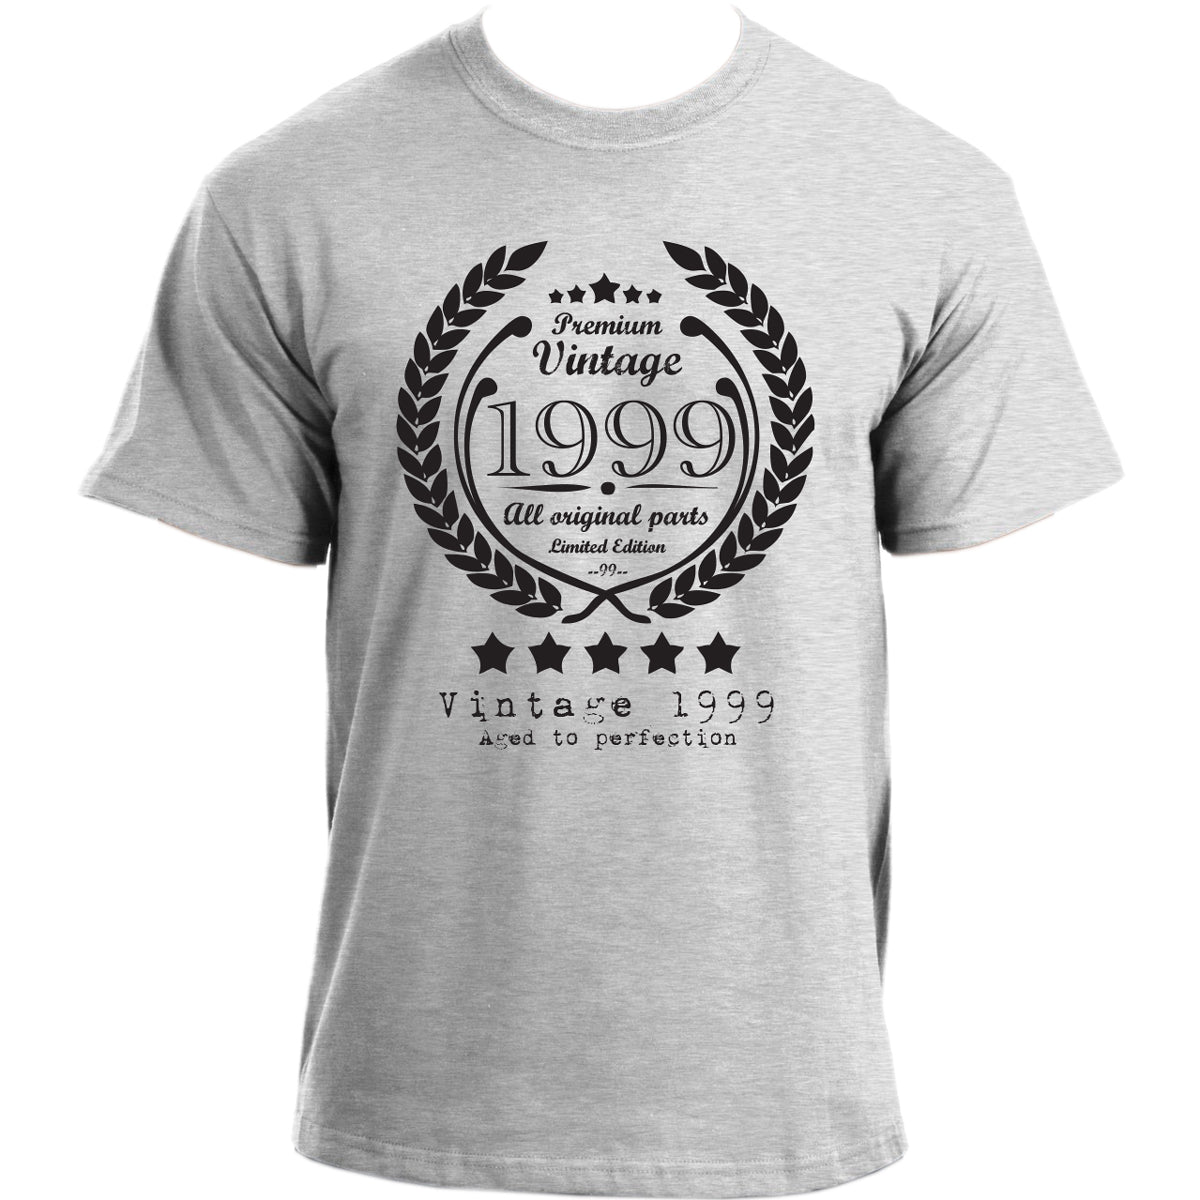 Premium Vintage 1999 Aged to Perfection Limited Edition Birthday Present Mens t-shirt